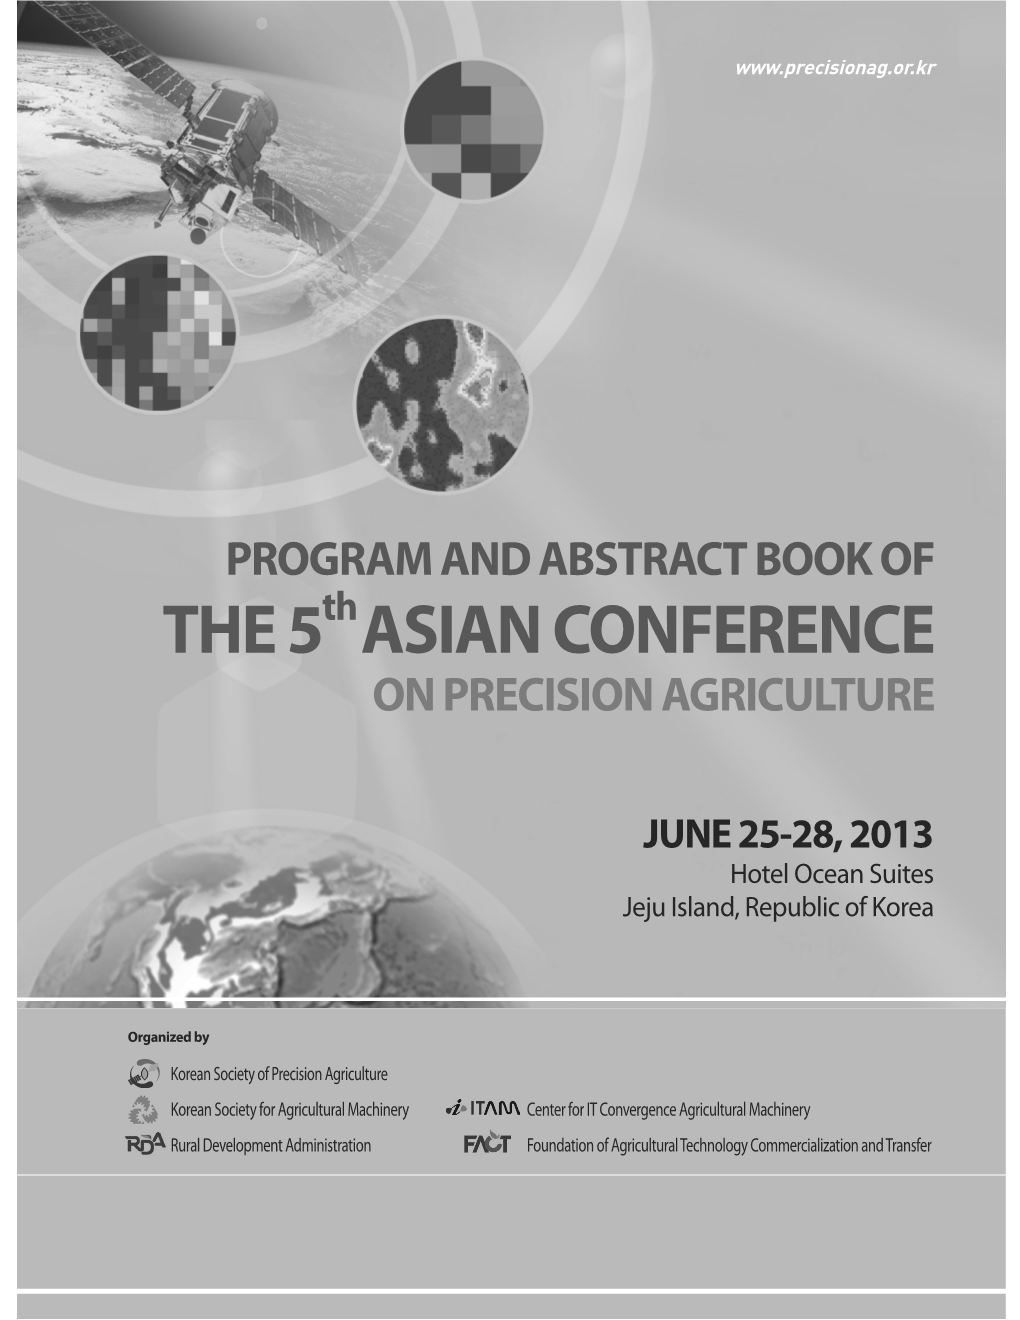 The 5 Asian Conference on Precision Agriculture